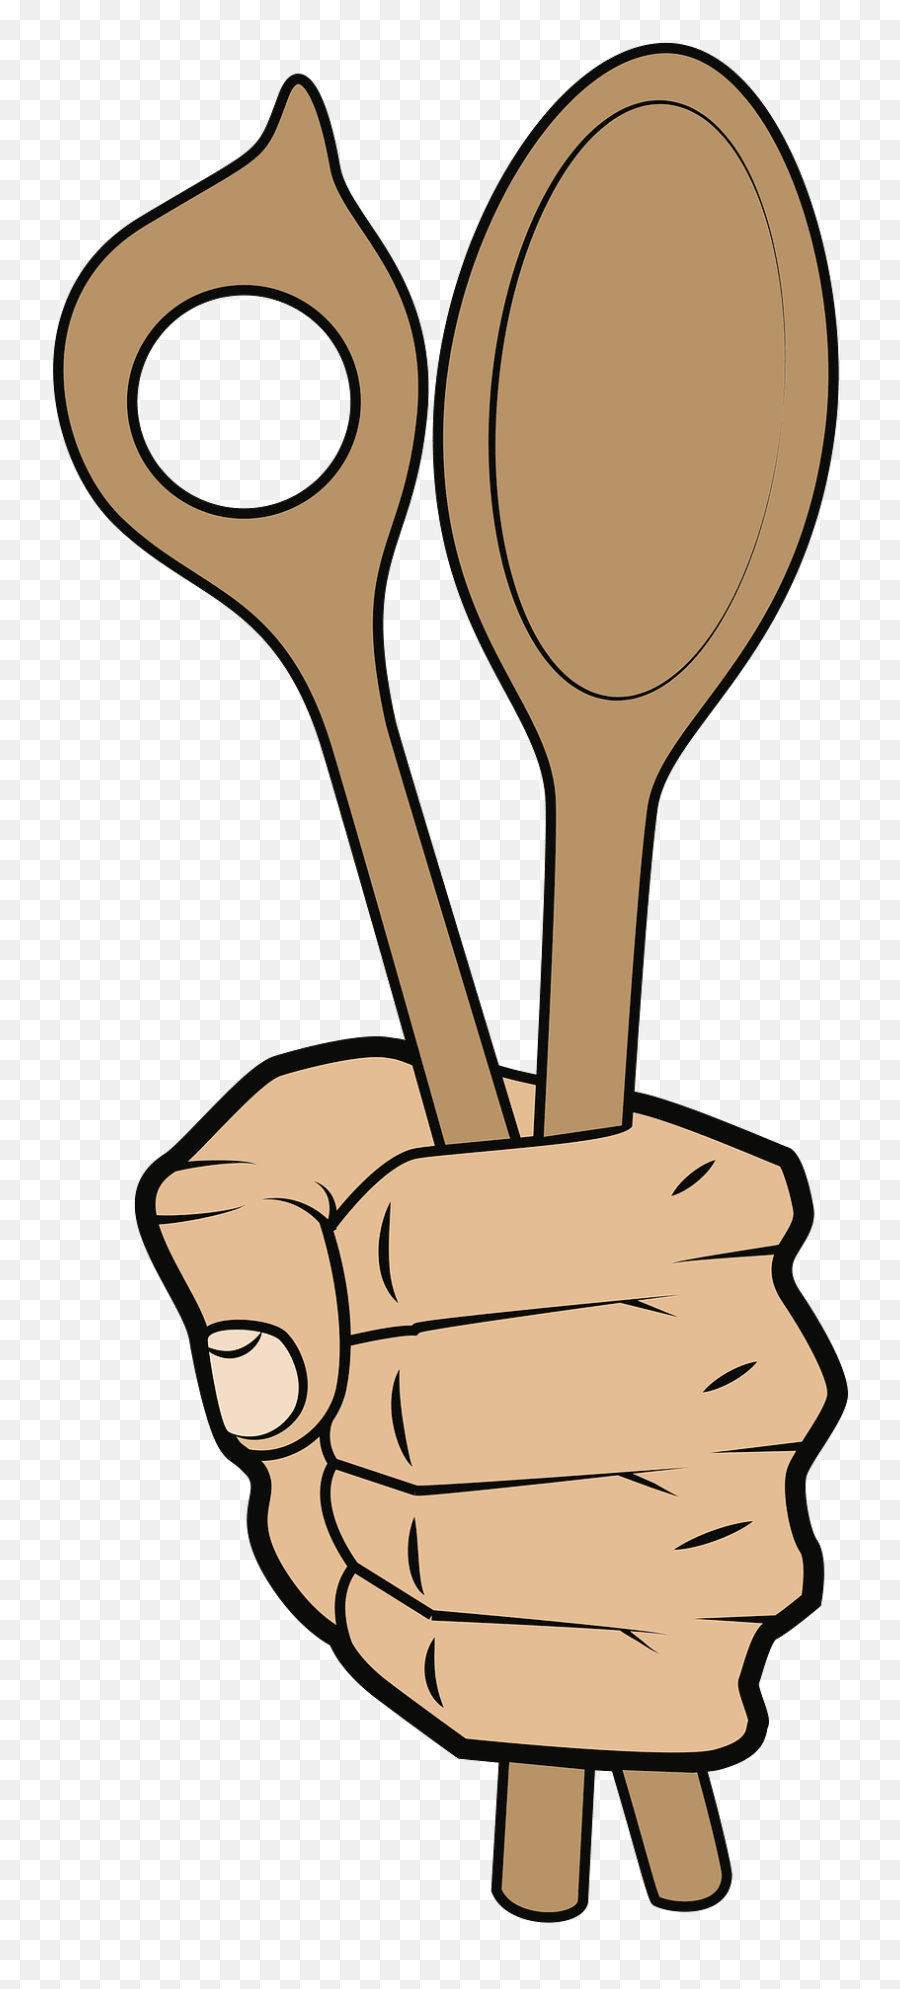 Hand Holding Wooden Spoons Clipart Free Download - Hand Holding A Spoon Artwork Emoji,Spoon Png